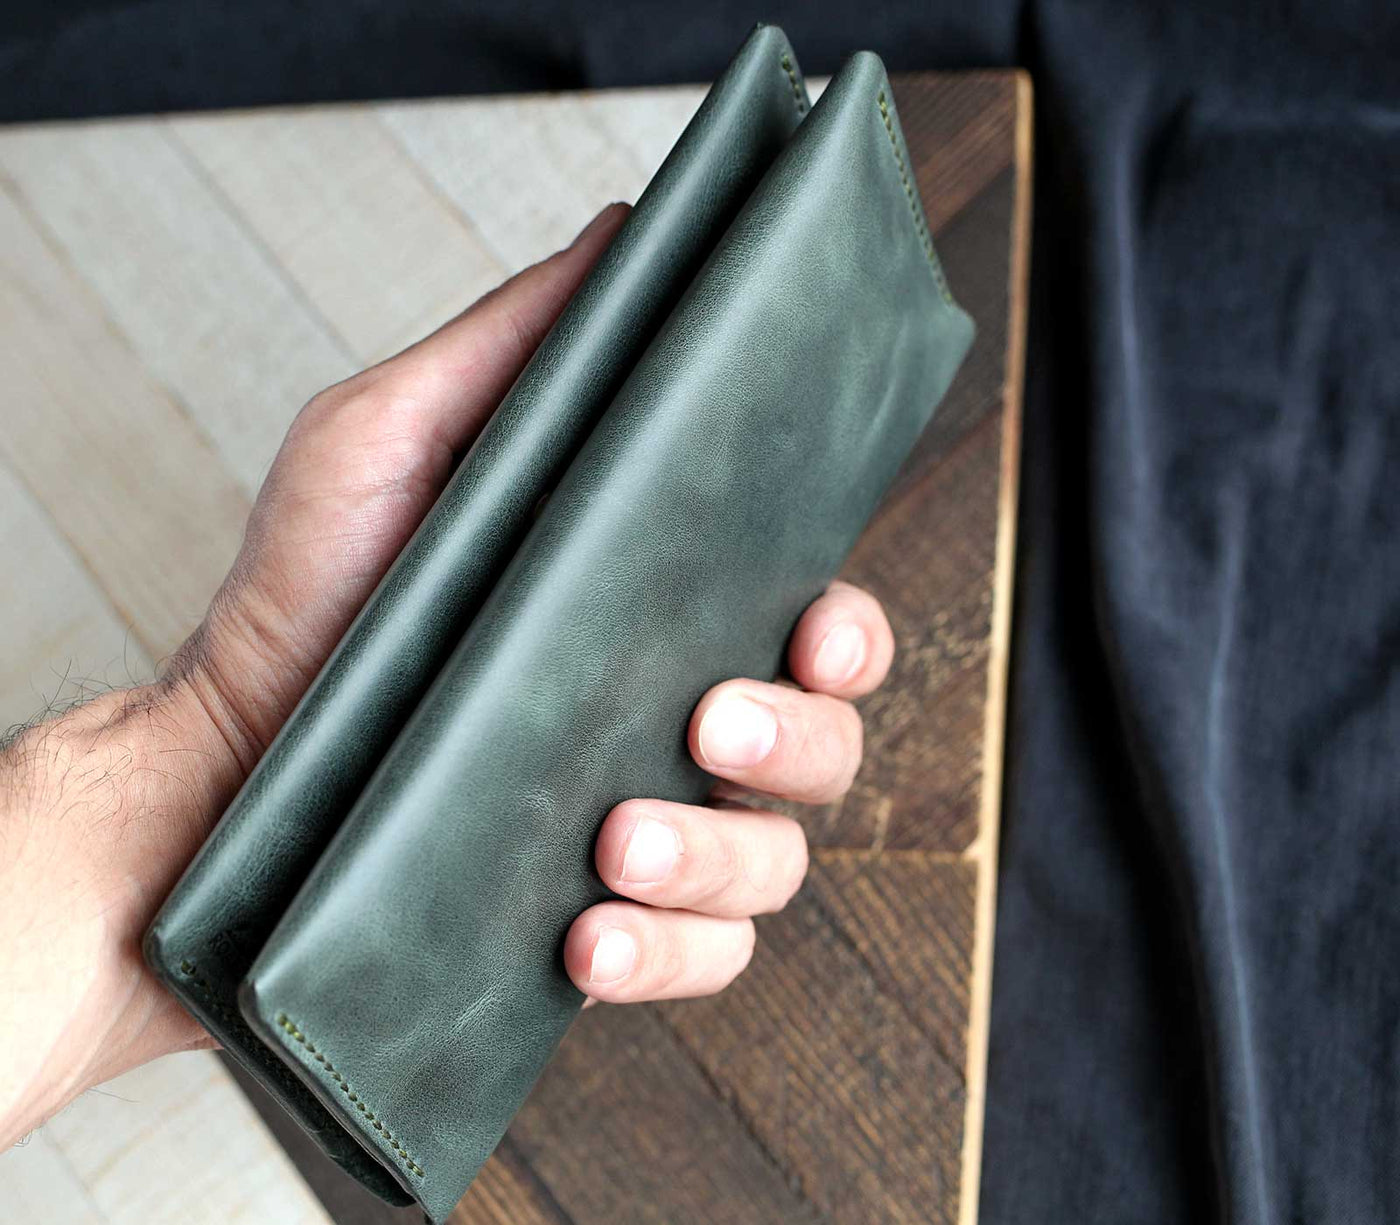 Double Phone Long Wallet